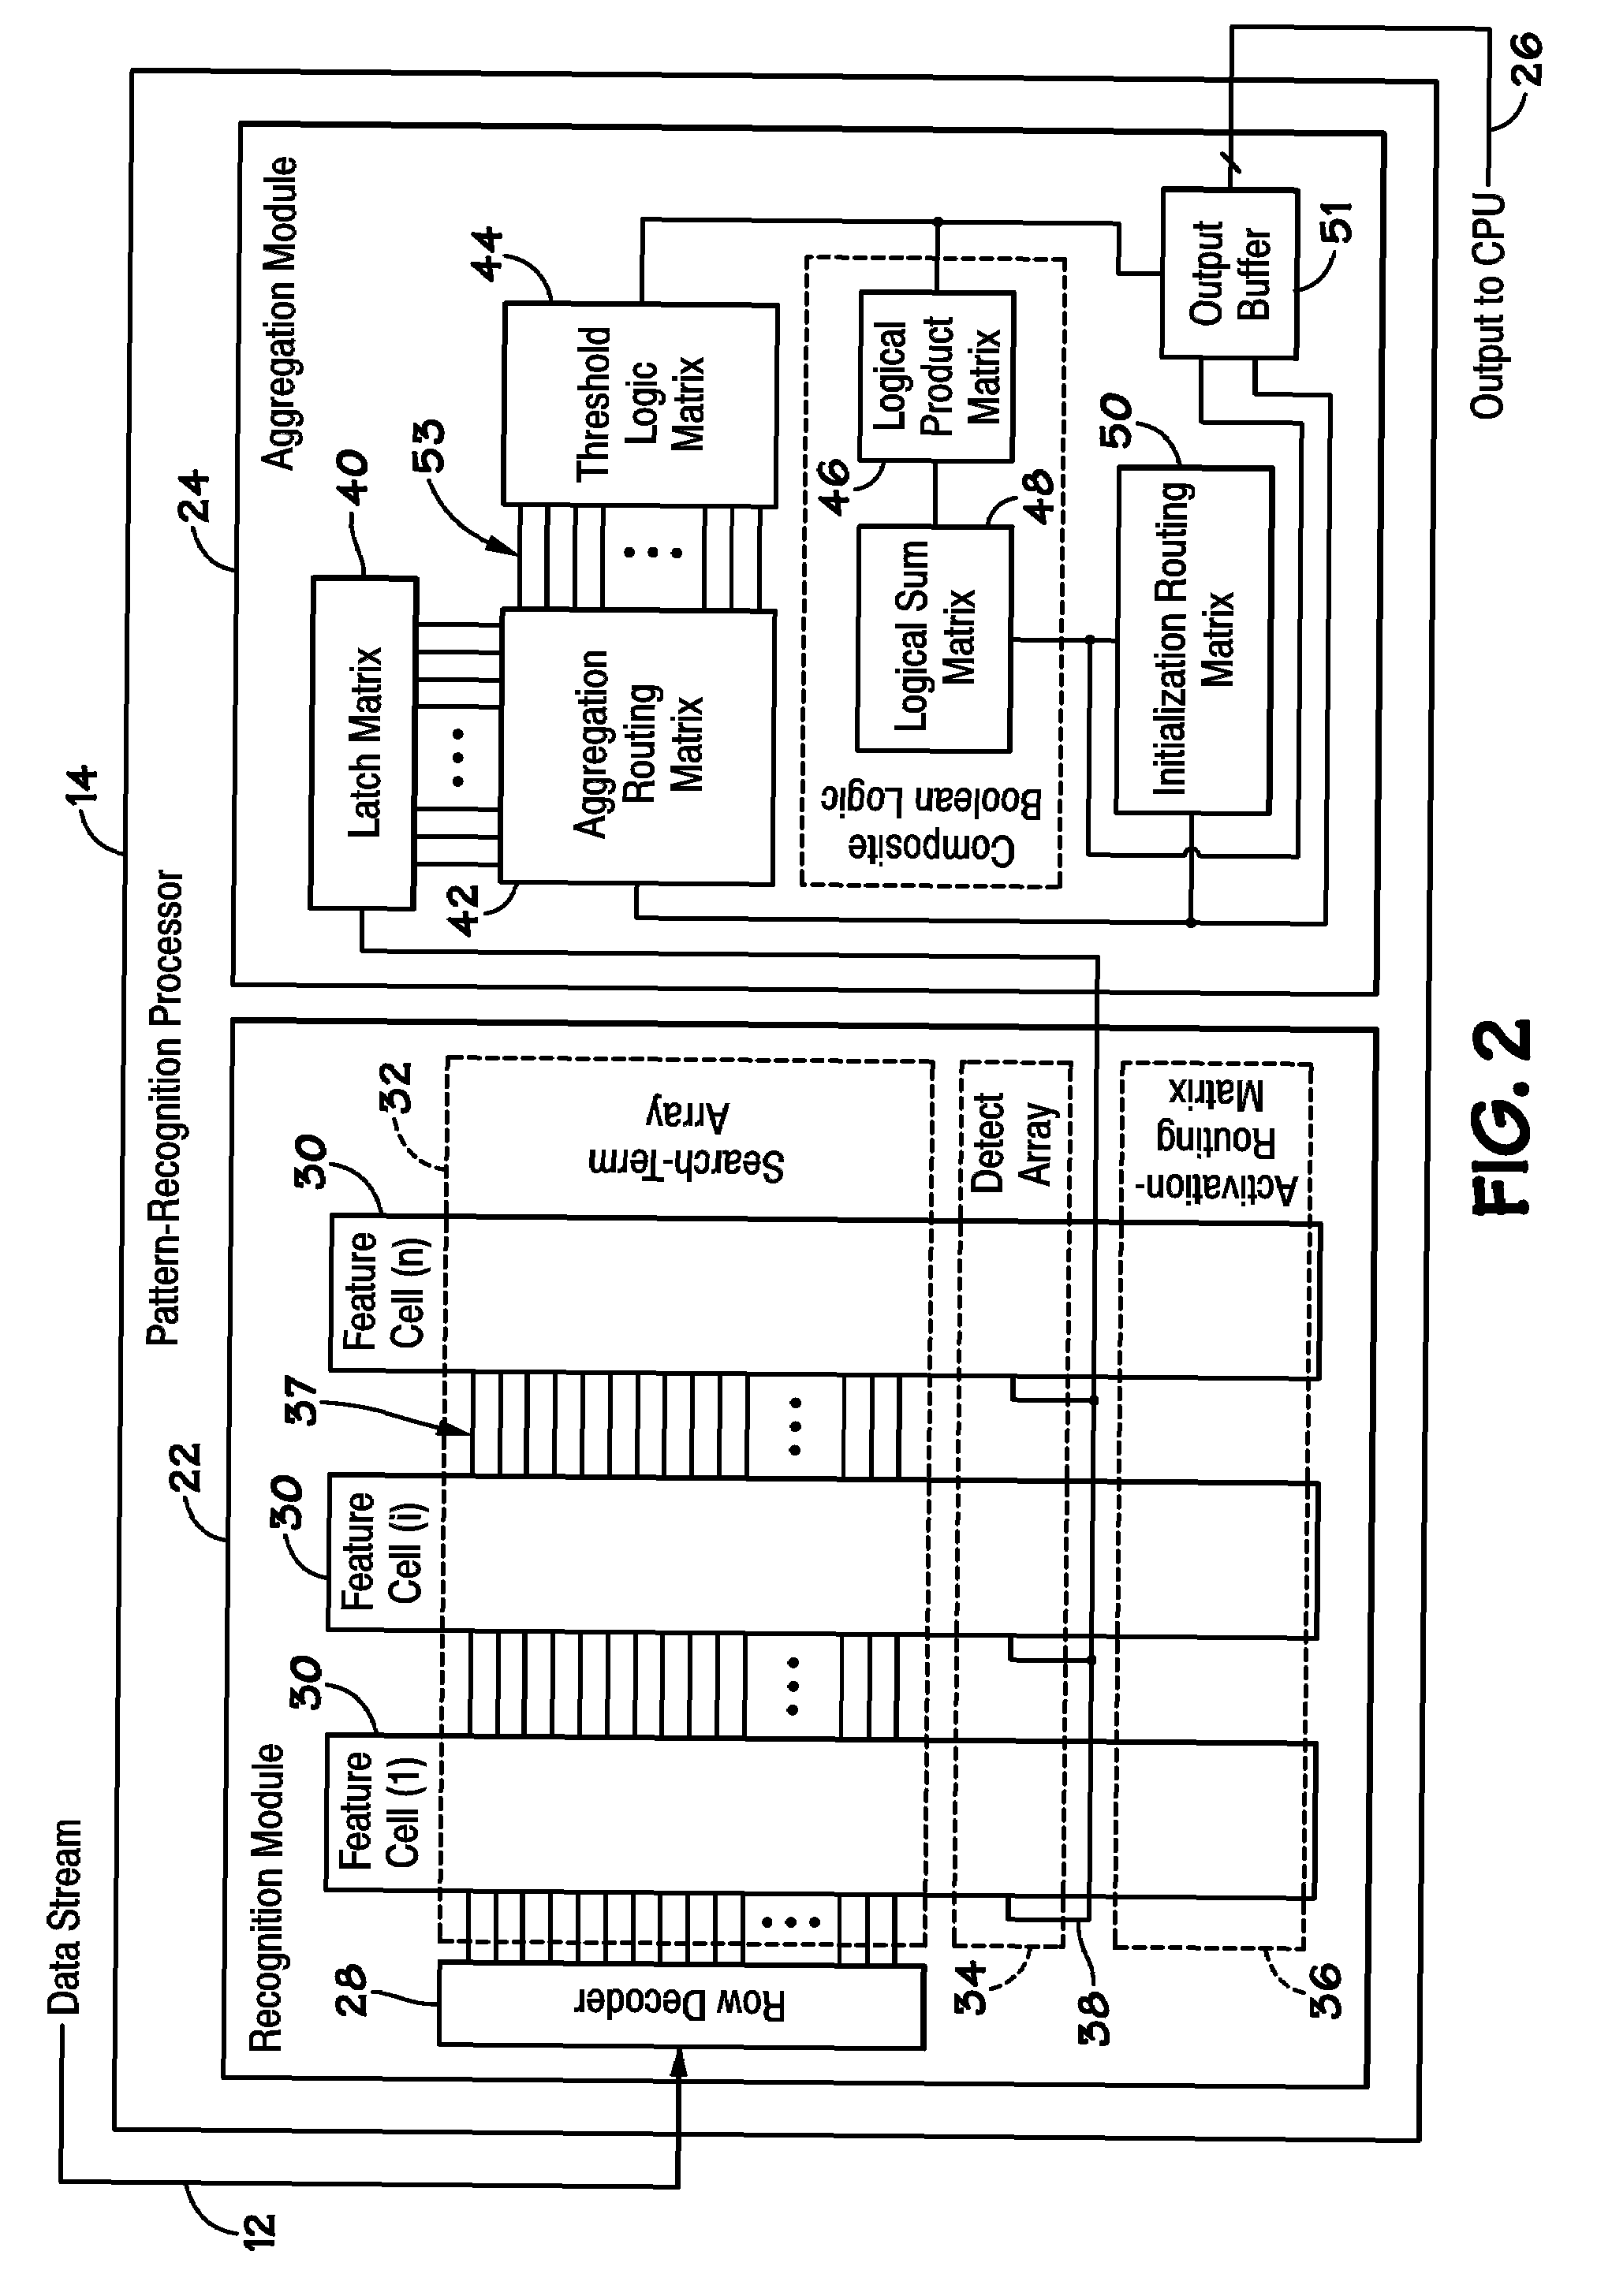 System and Method of Indirect Register Access